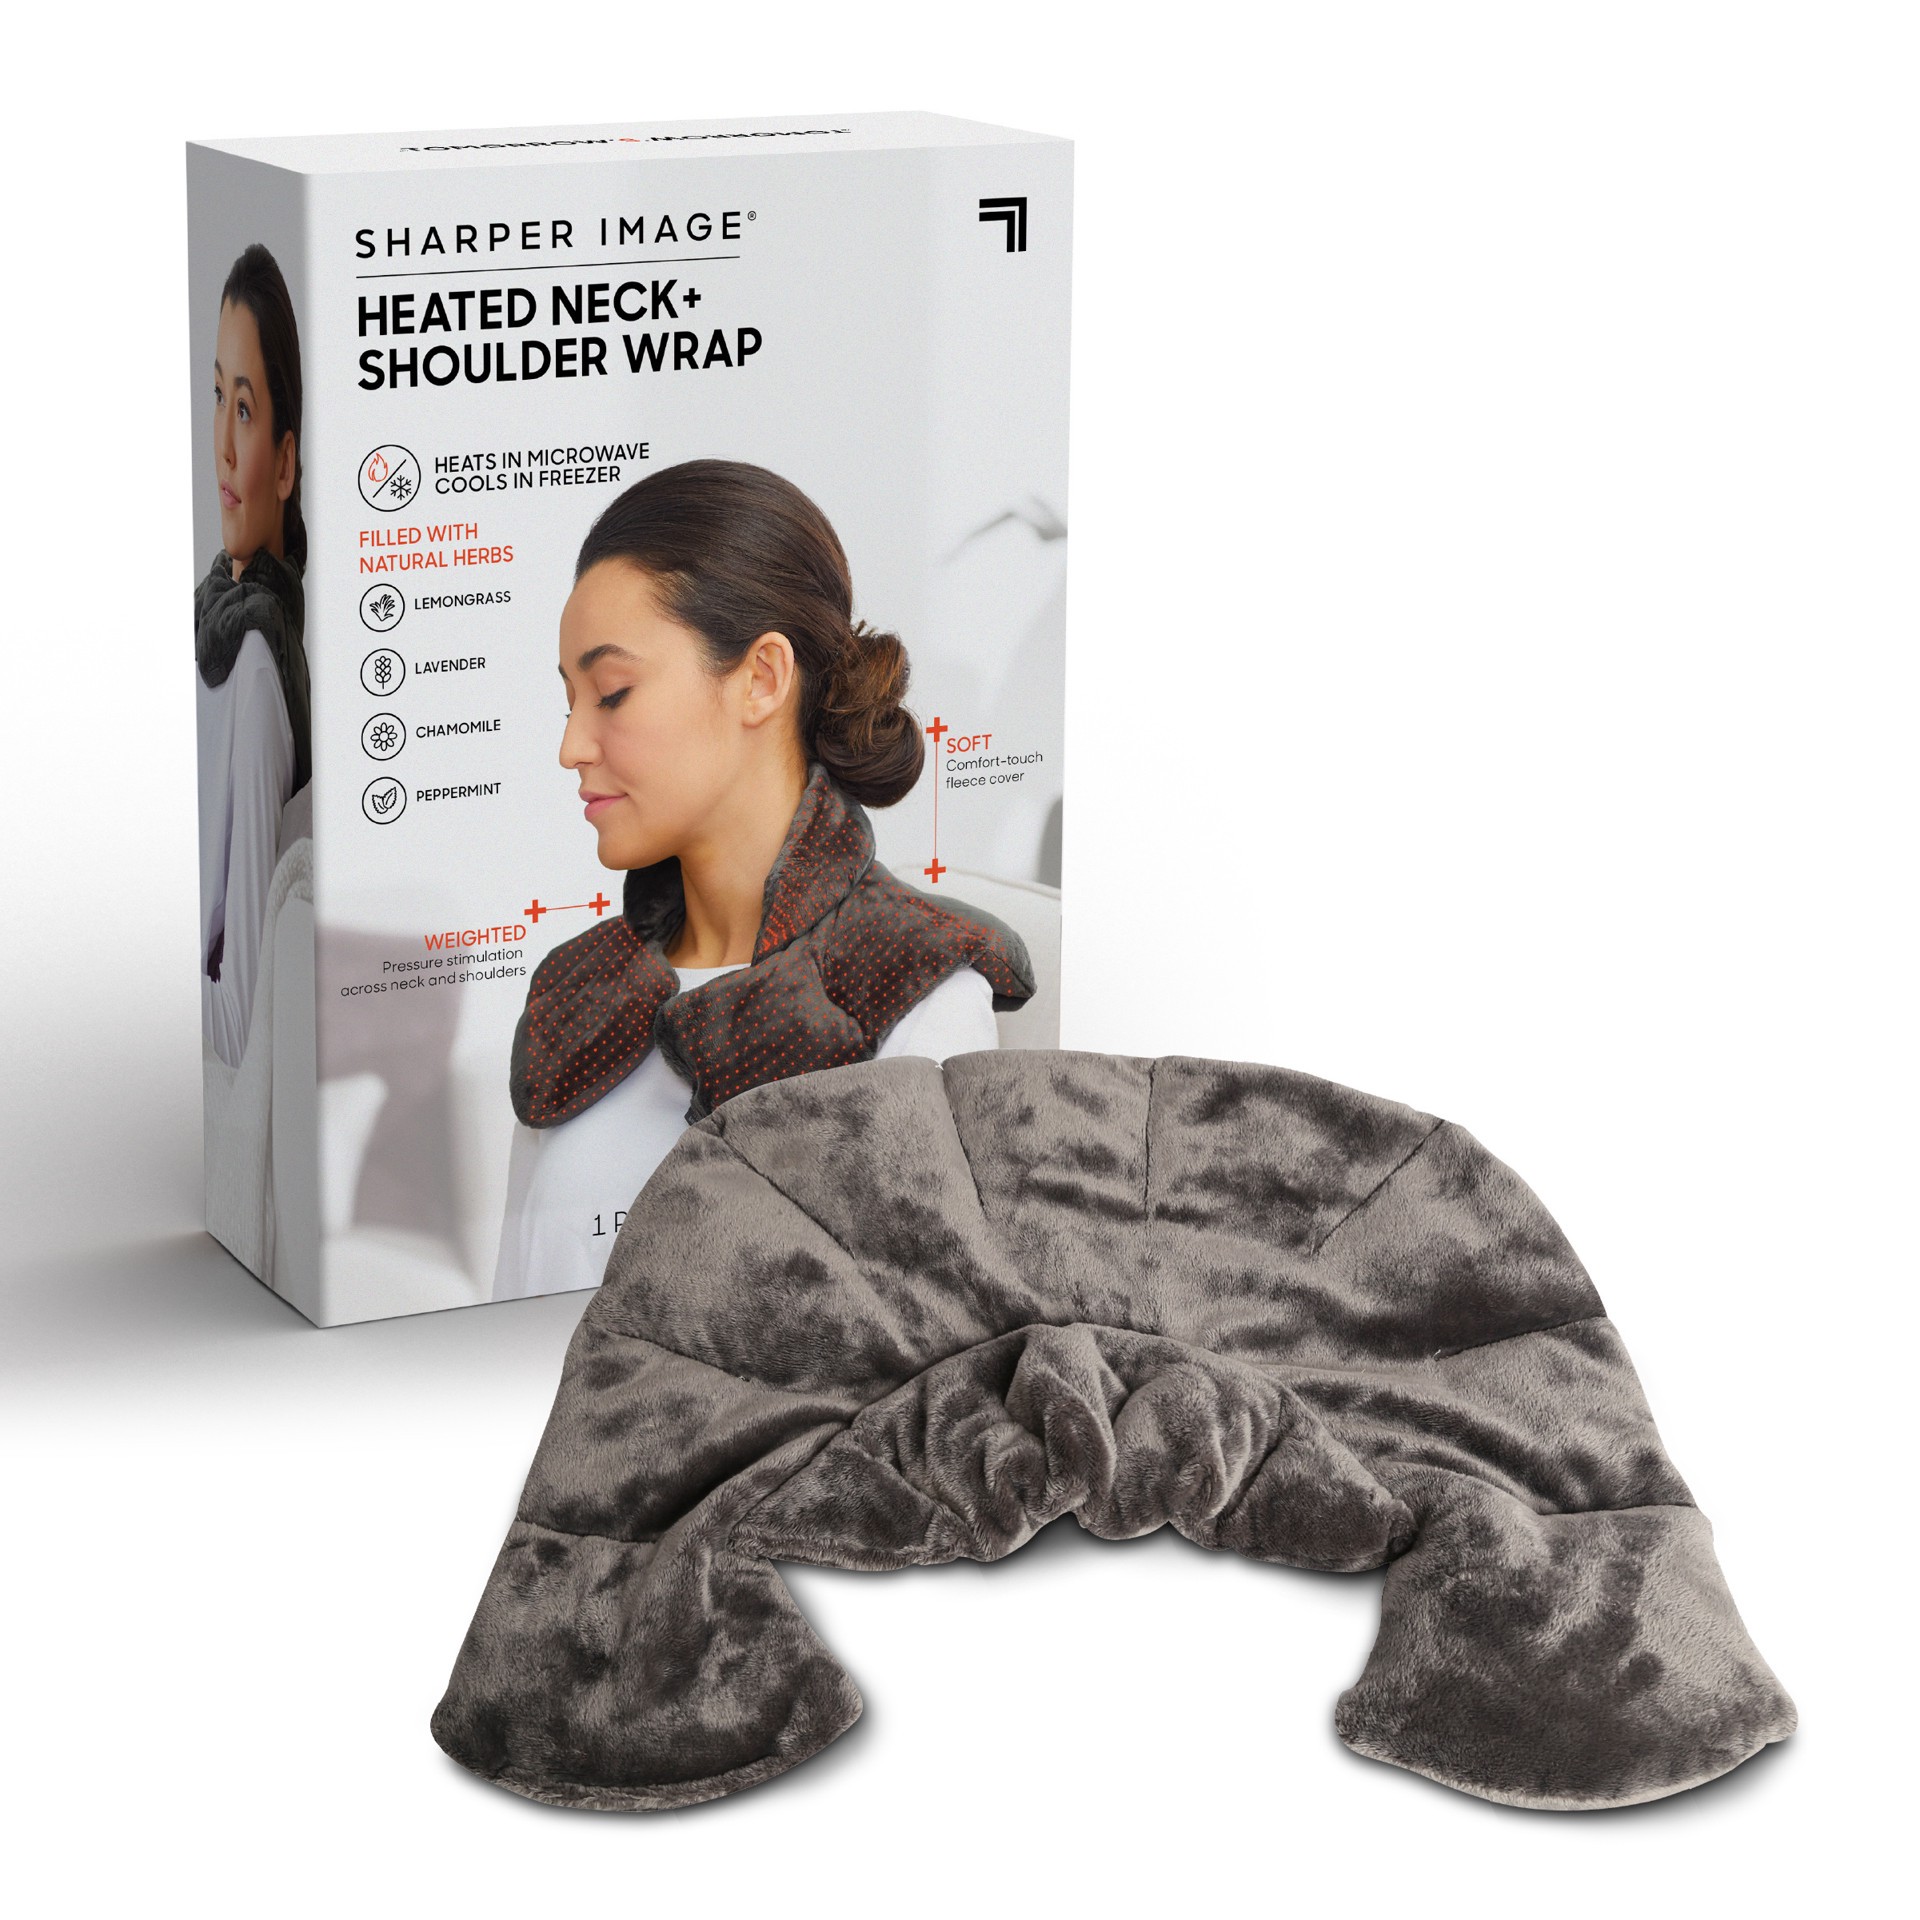 slide 1 of 8, Sharper Image Hot & Cold Herbal Aromatherapy Neck & Shoulder Plush Wrap Pad for Soothing Muscle Pain and Tension Relief Therapy, 100% Natural Lavender & Herb Spa Blend, Use in Microwave or Freezer, 1 ct